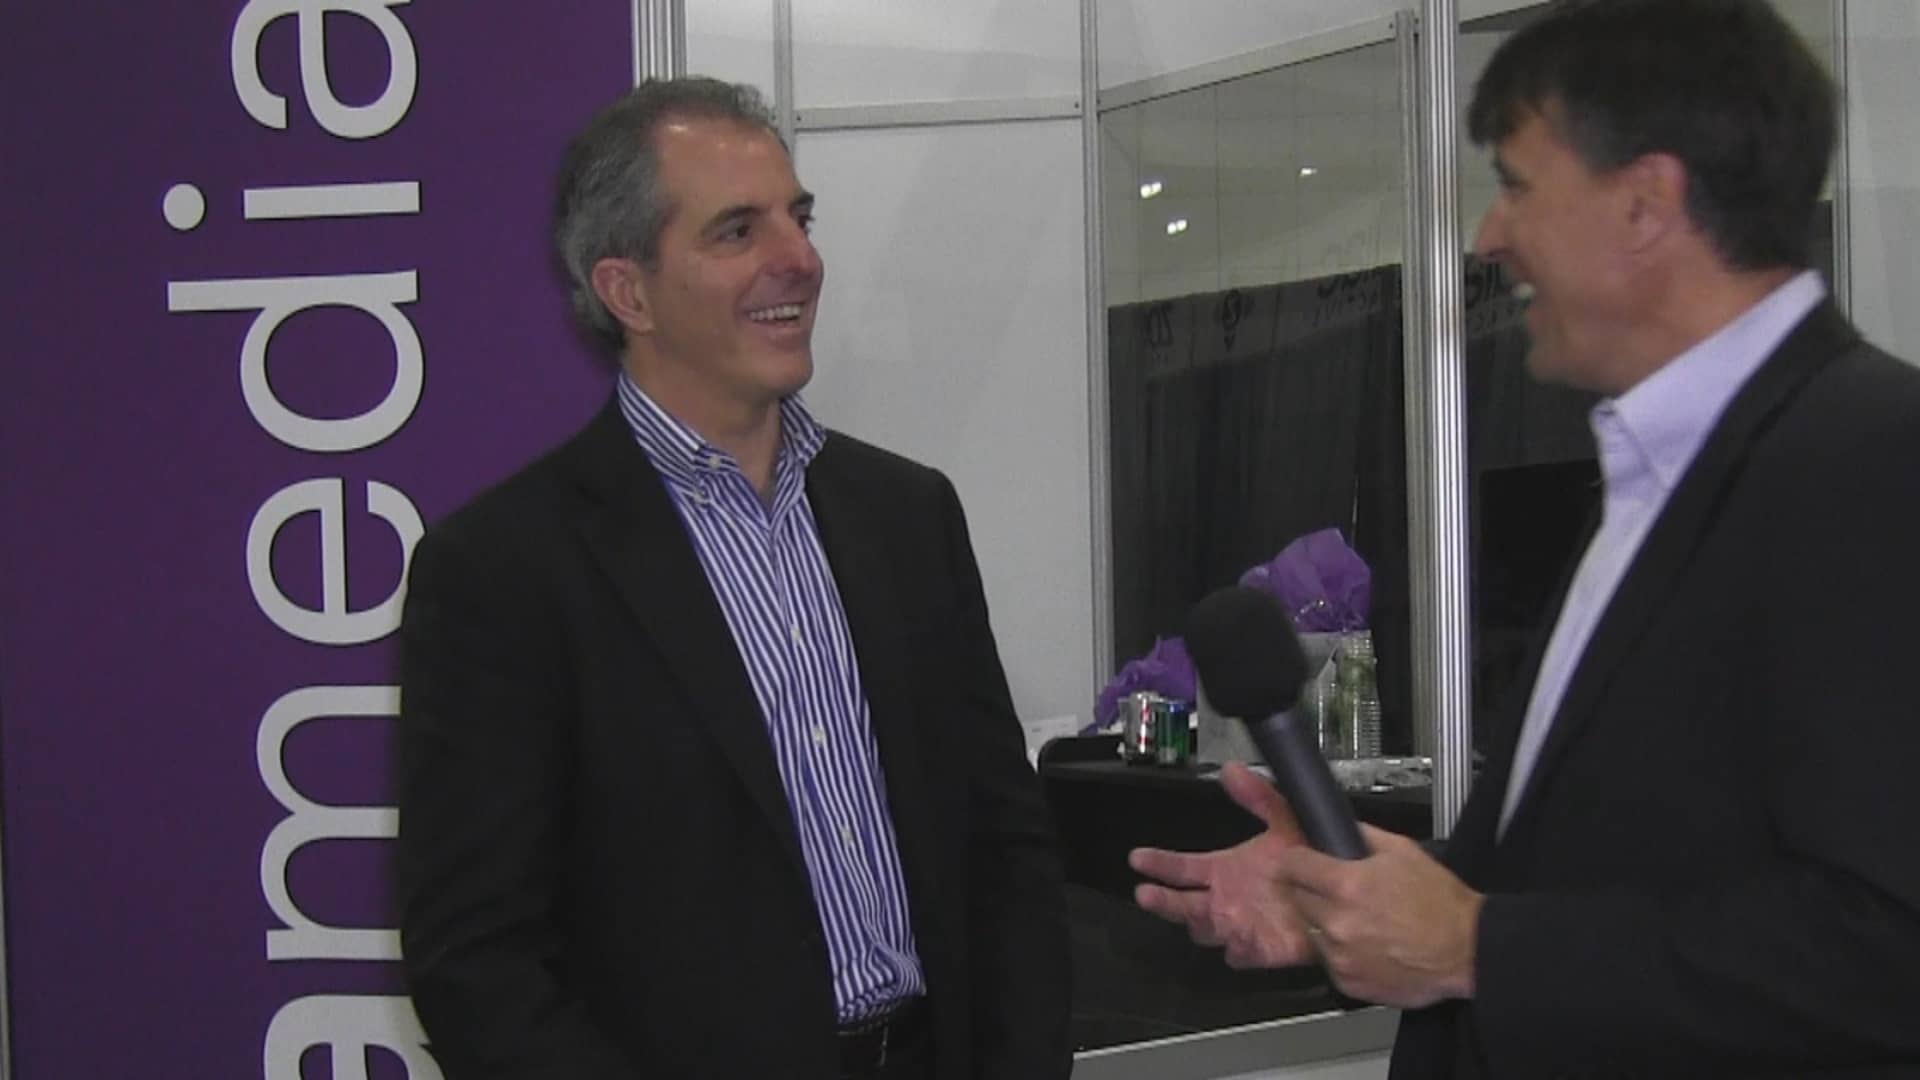 Ken Pyle interviews Mark Lieberman, CEO and president, of Viamedia at The Cable Show 2014.